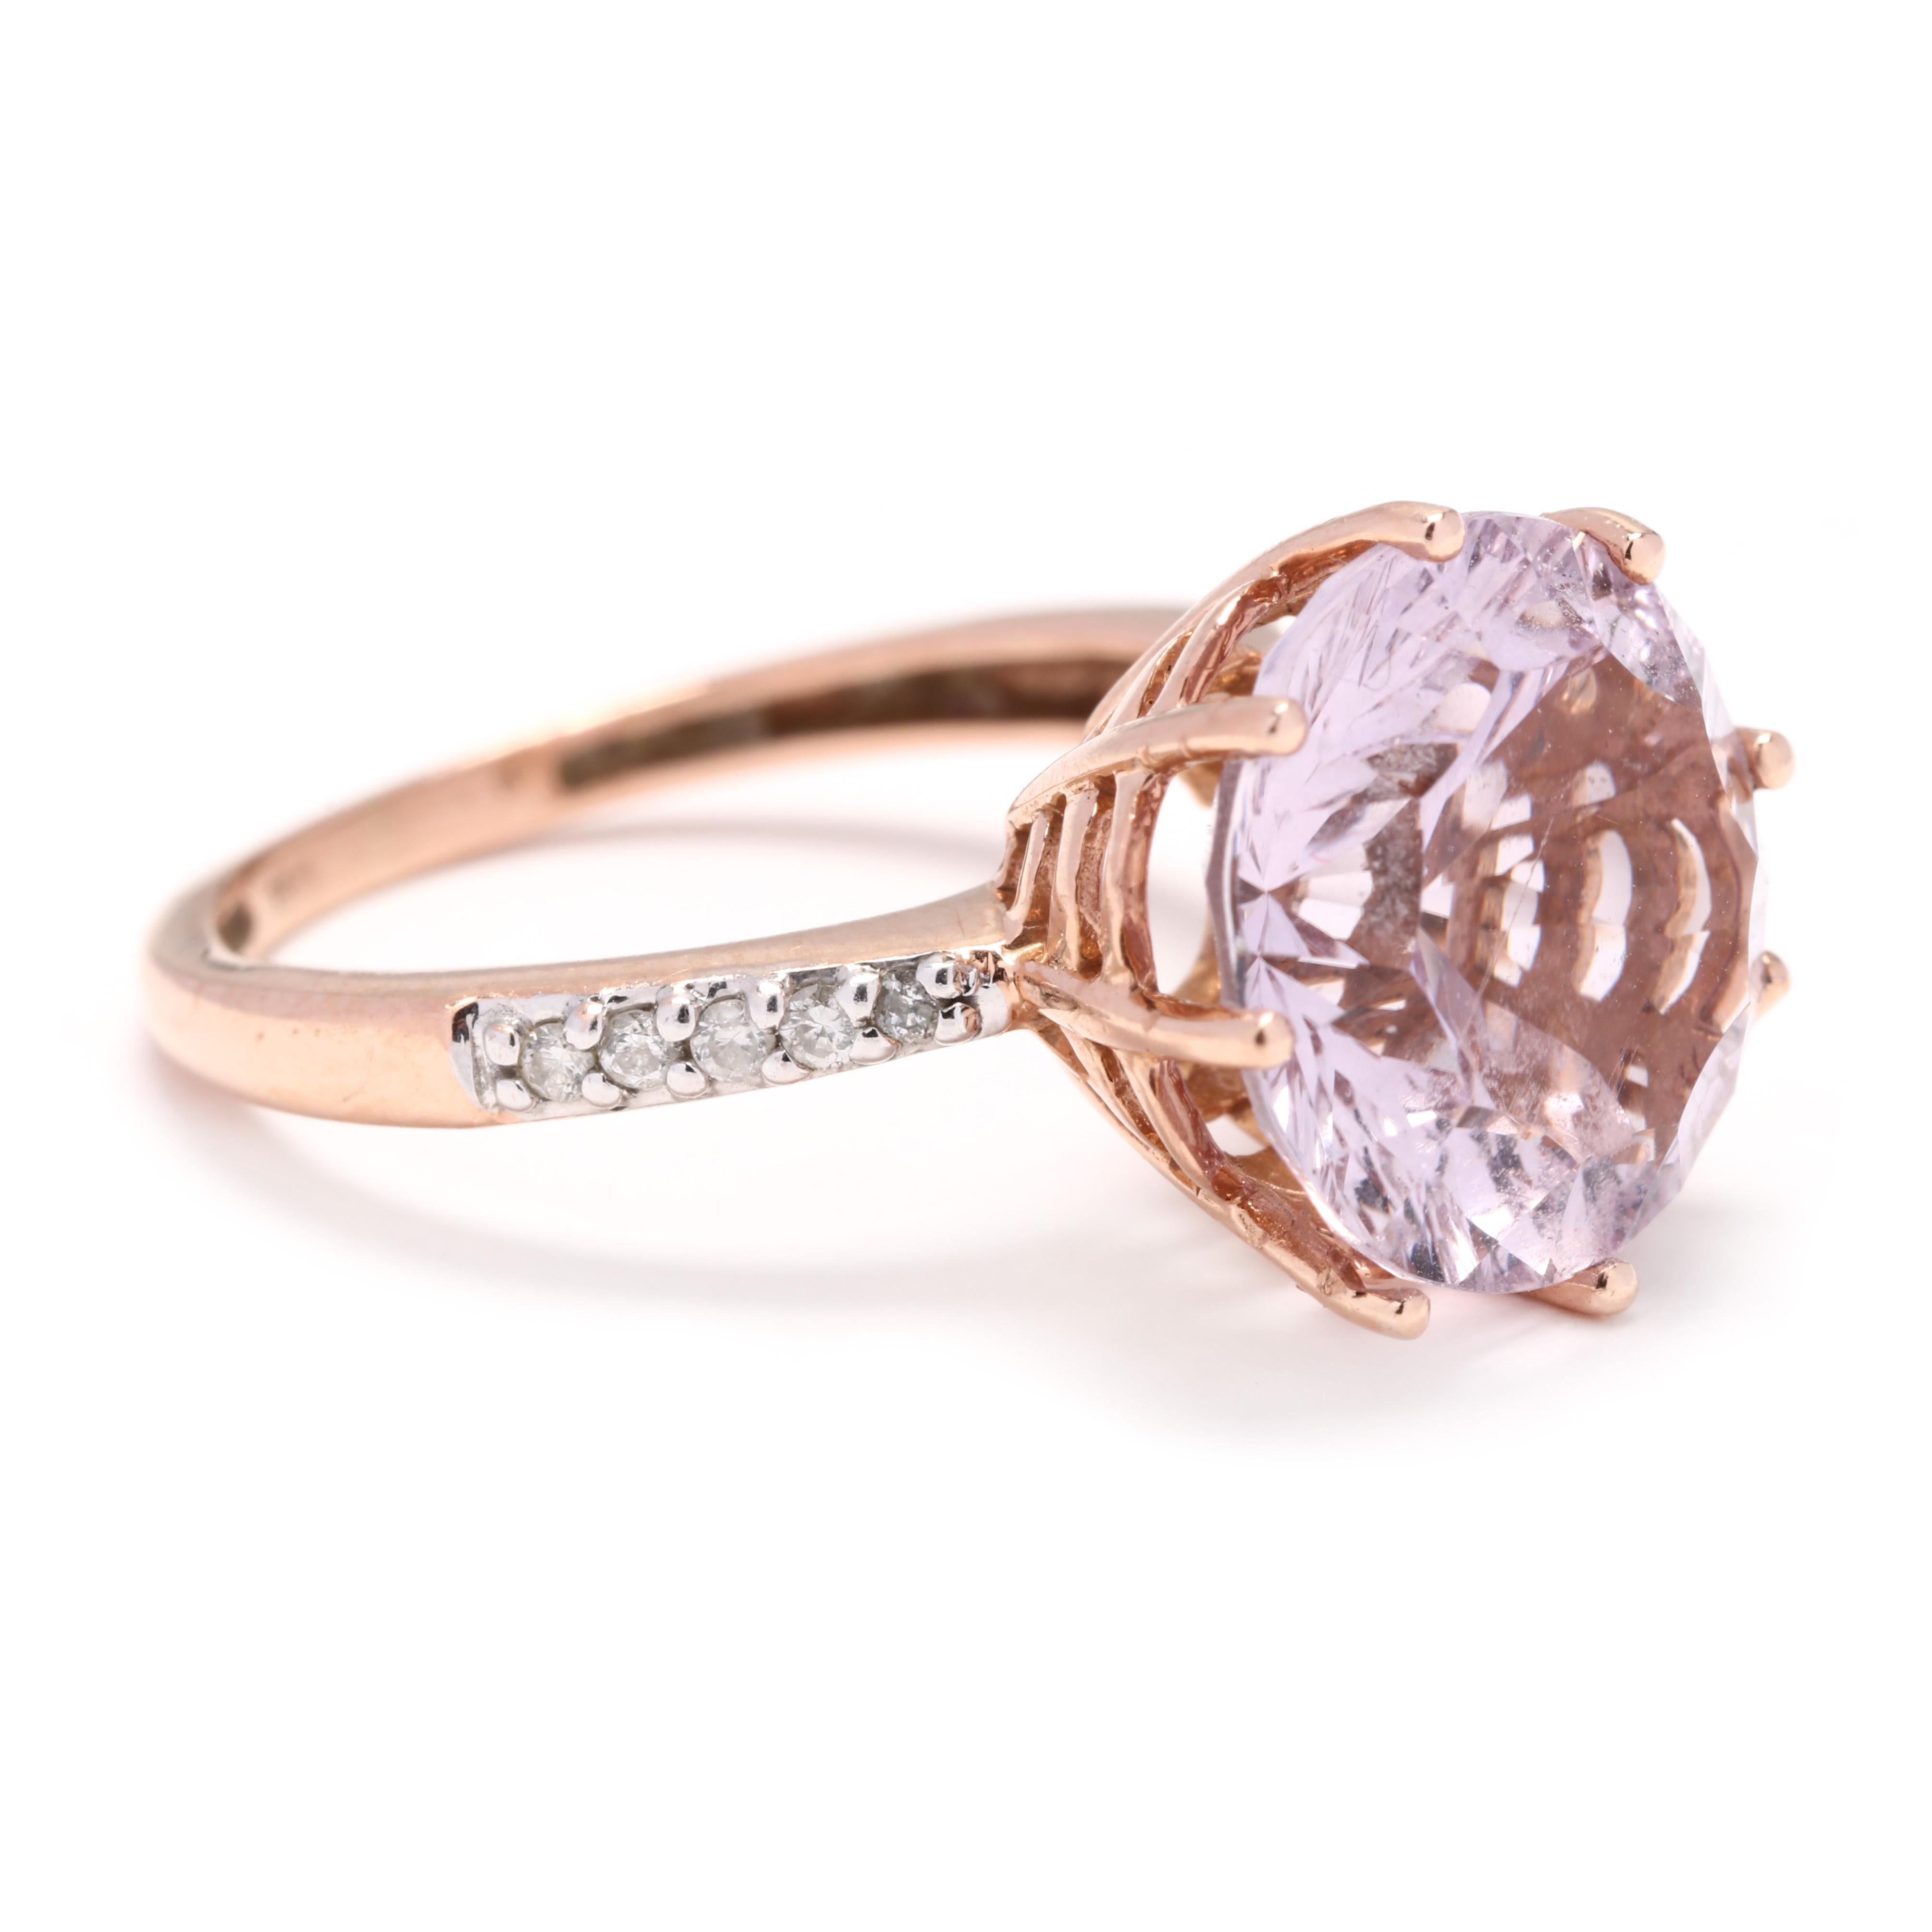 A 14 karat rose gold amethyst and diamond cocktail ring. This ring features a prong set, round brilliant cut light amethyst center stone with full cut round diamonds on either side weighing approximately .10 total carats and with a slightly tapered